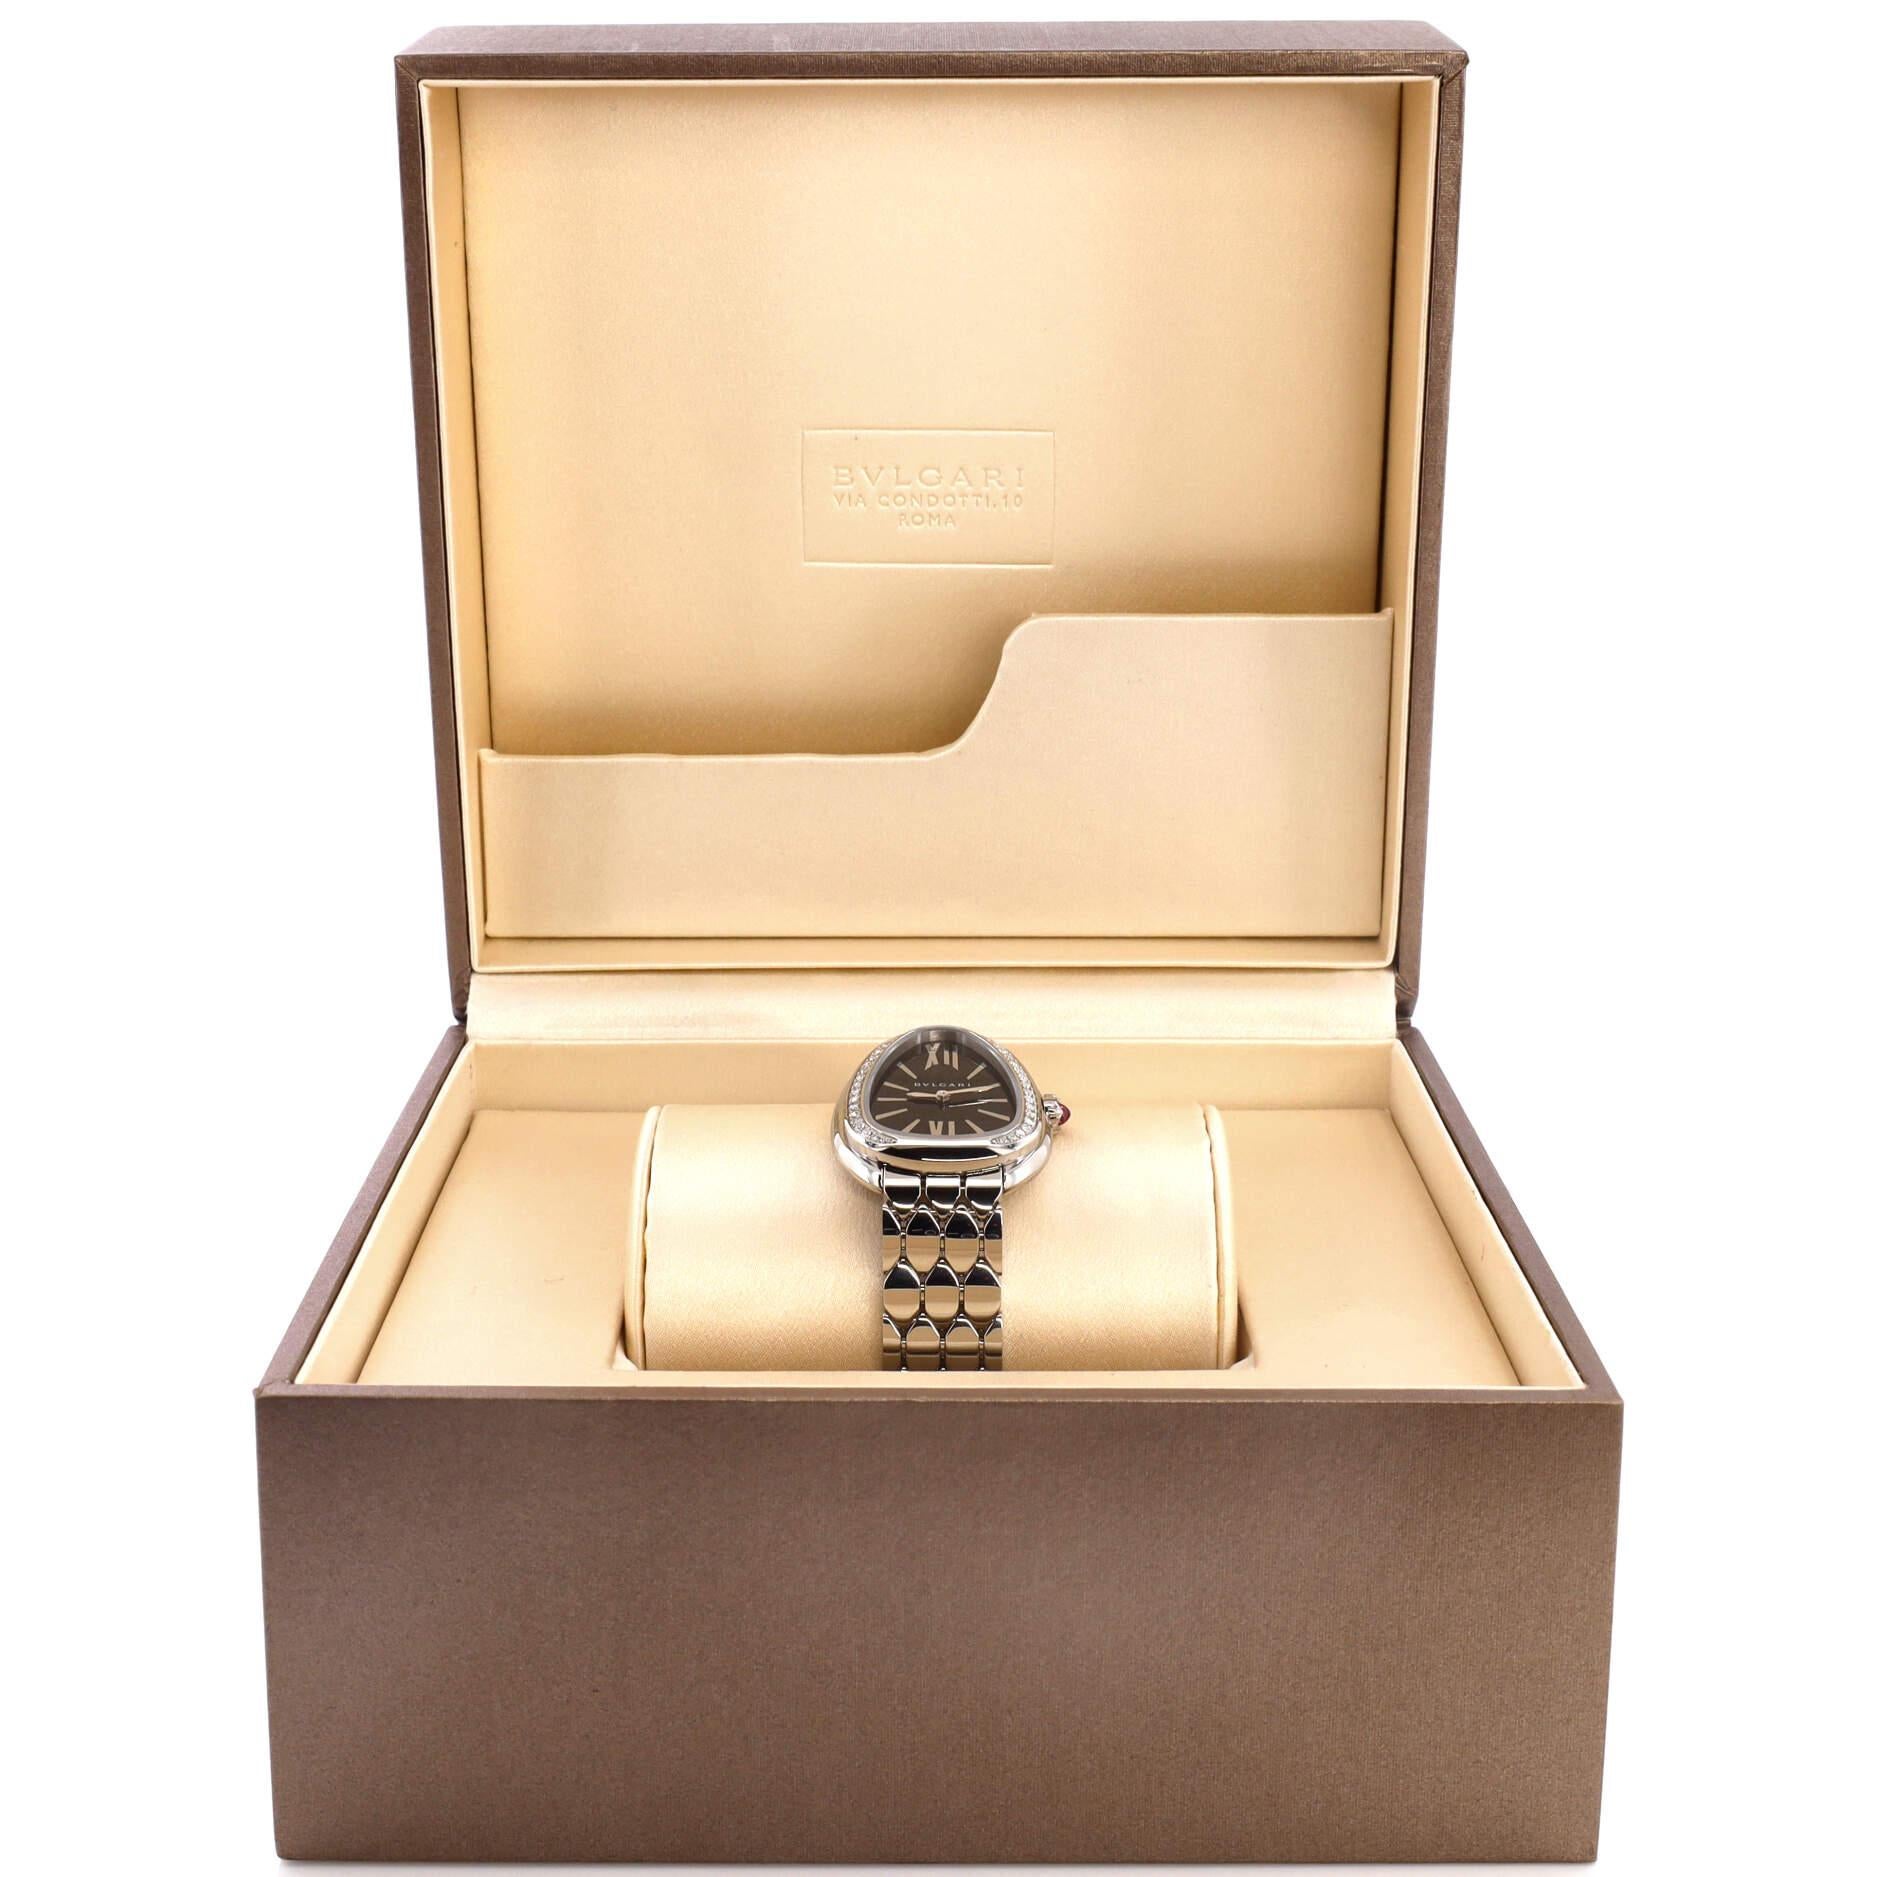 Condition: Great. Minor wear throughout case and bracelet.
Accessories: Box, Warranty Card - Dated
Measurements: Case Size/Width: 25mm, Watch Height: 7mm, Band Width: 13mm, Wrist circumference: 5.75